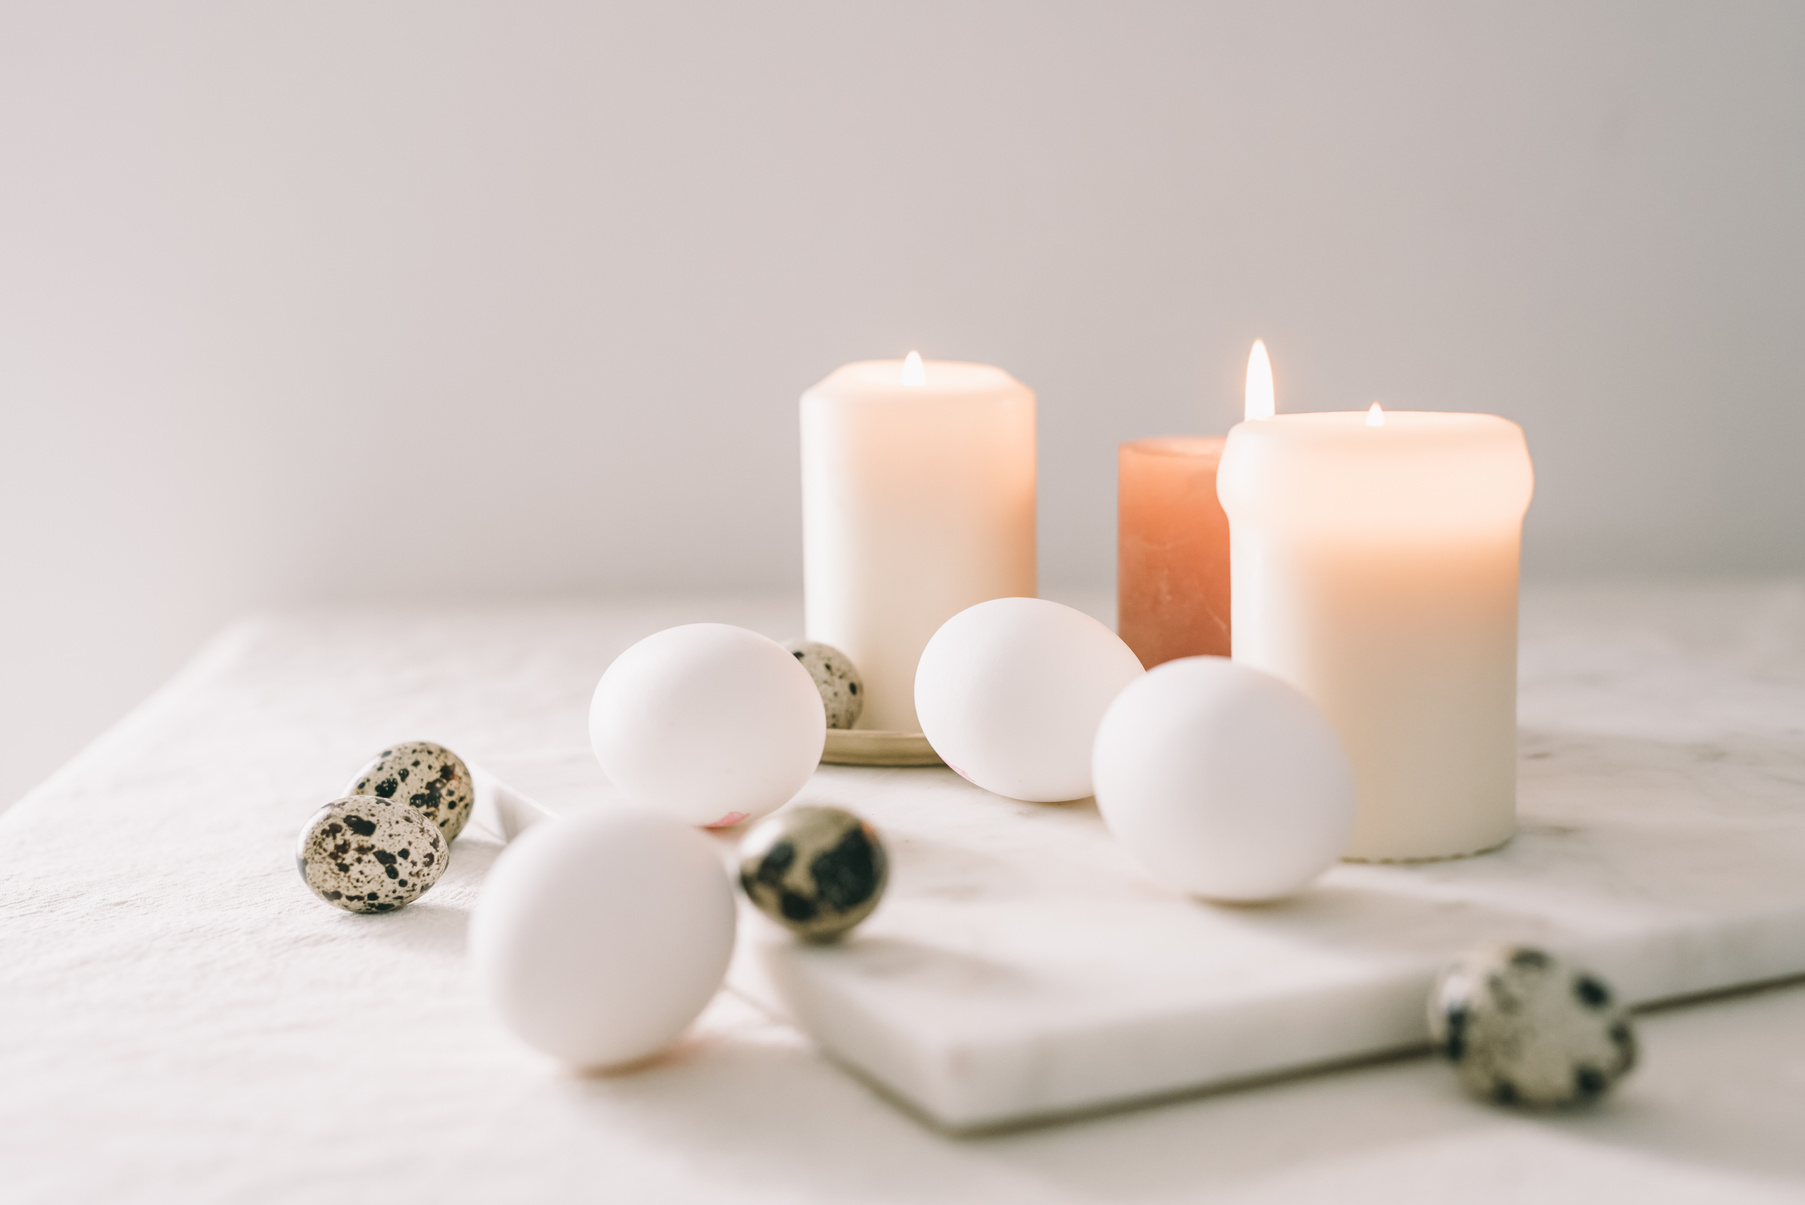 White Eggs And Quail Eggs Beside Lighted Candles